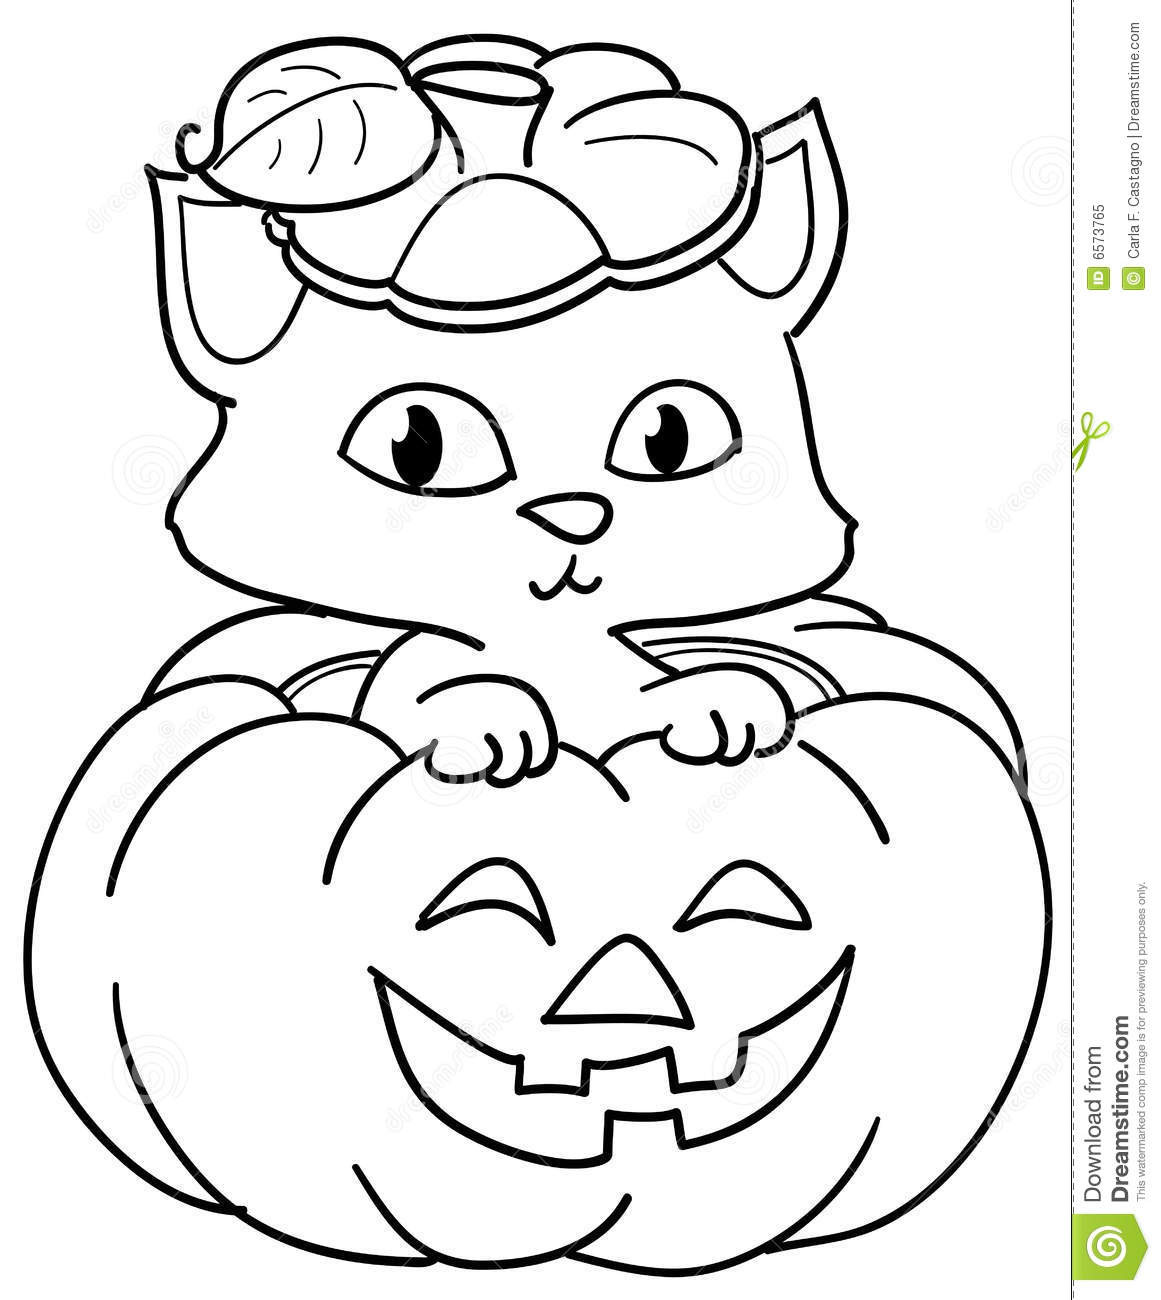 Cute Halloween Coloring Pages For Kids
 Pumpkin And Cute Cat Coloring Stock Vector Illustration